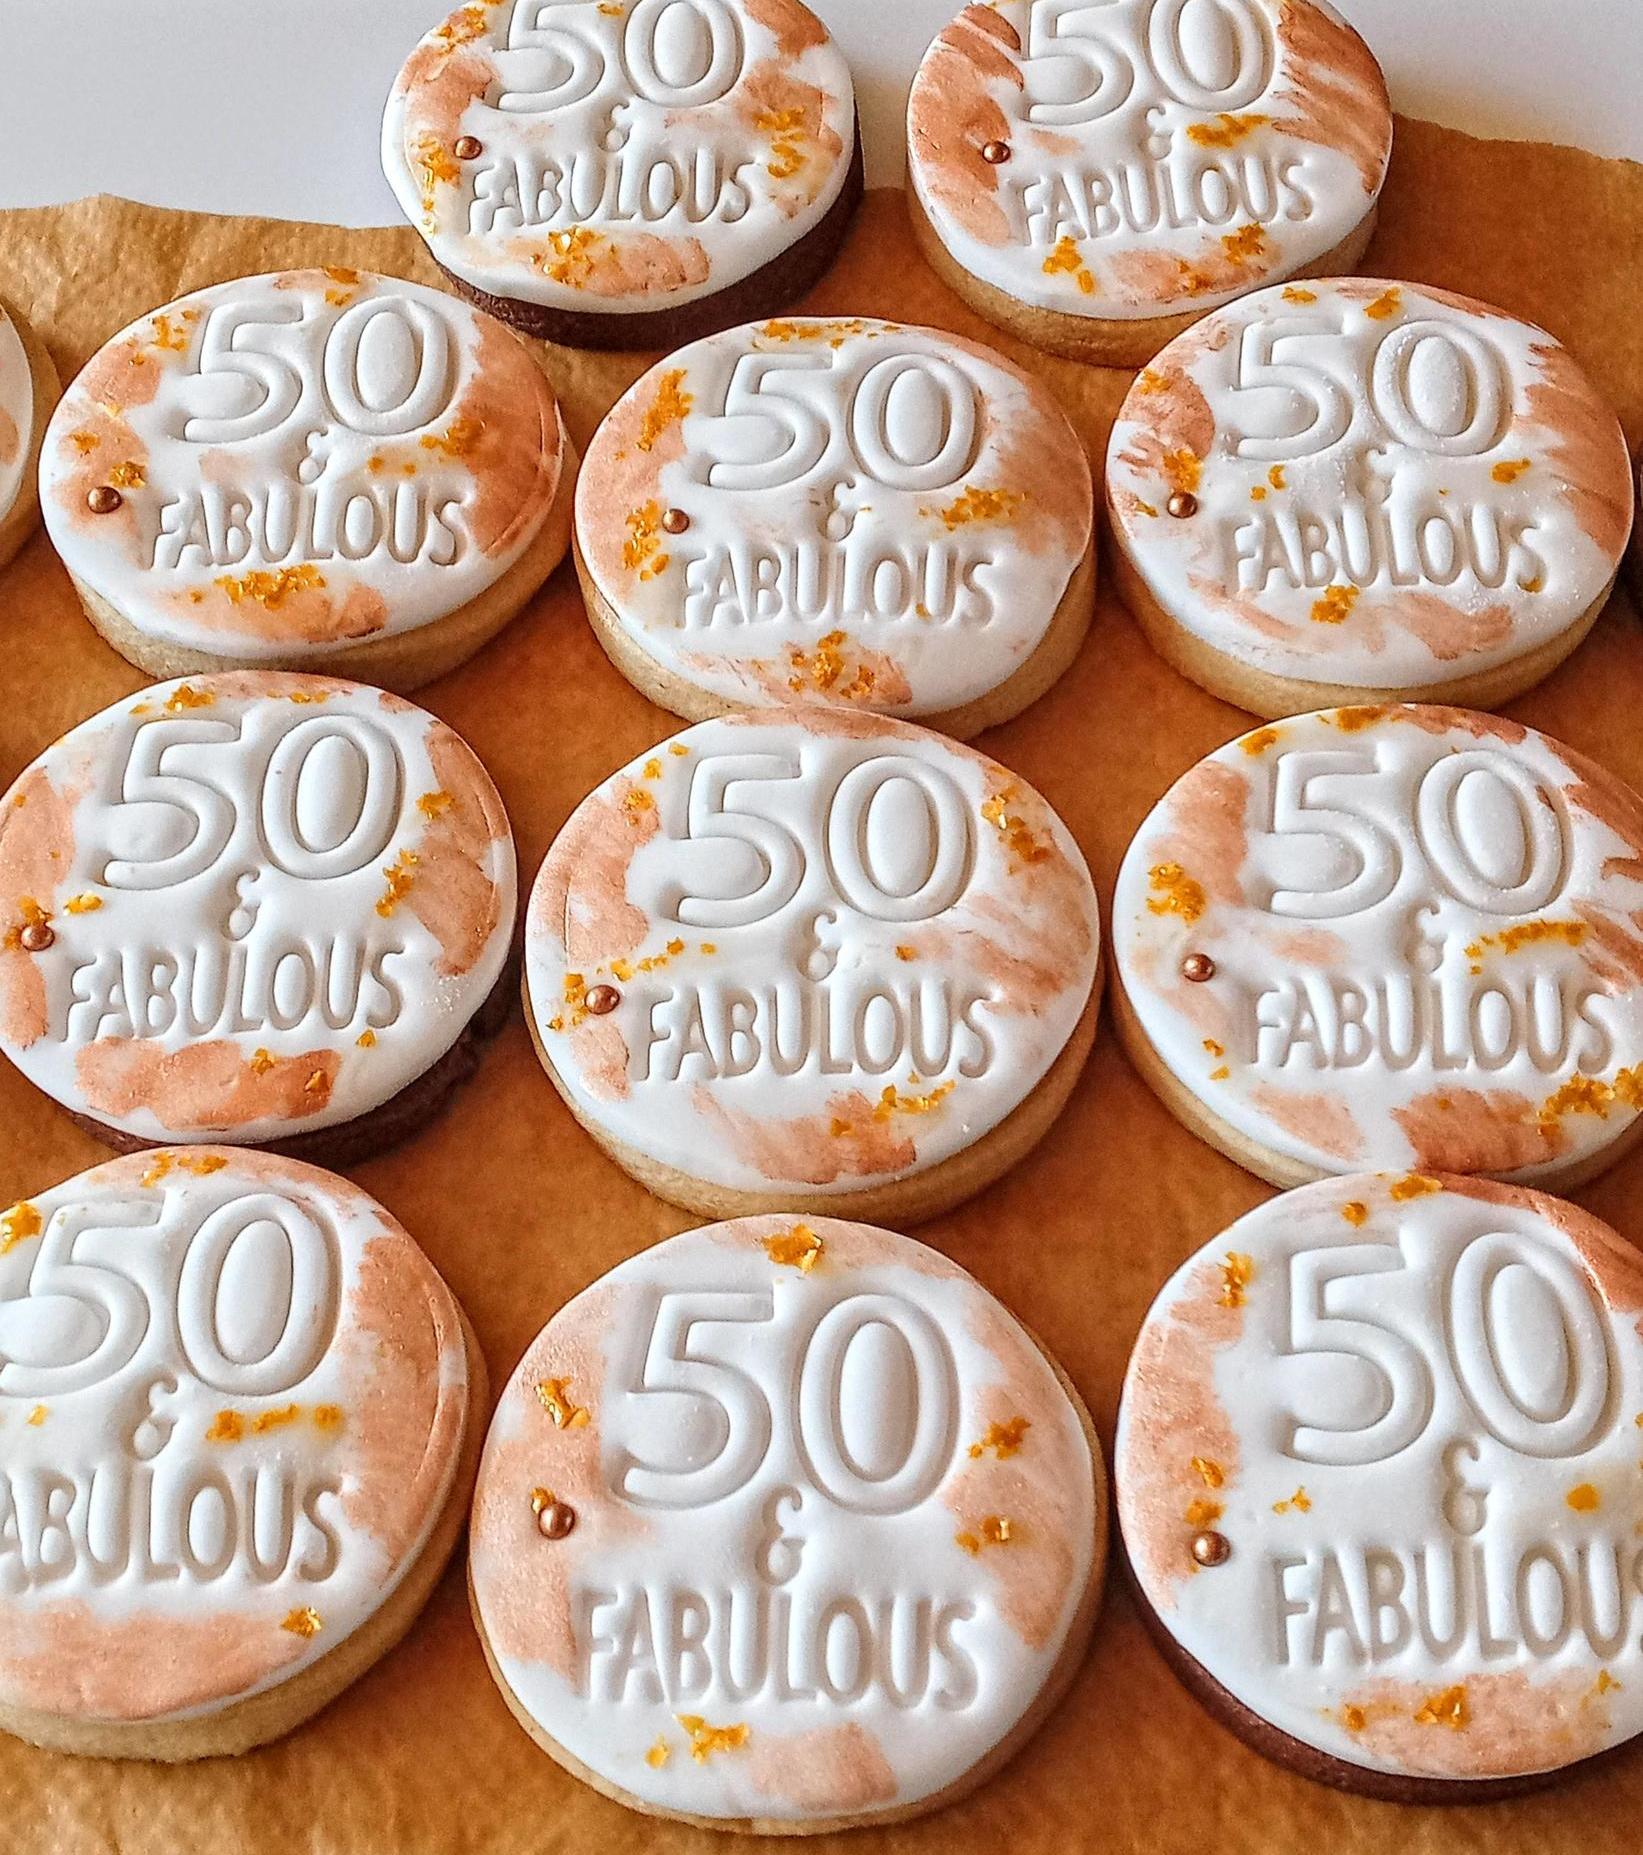 "50 and fabulous" birthday cookies